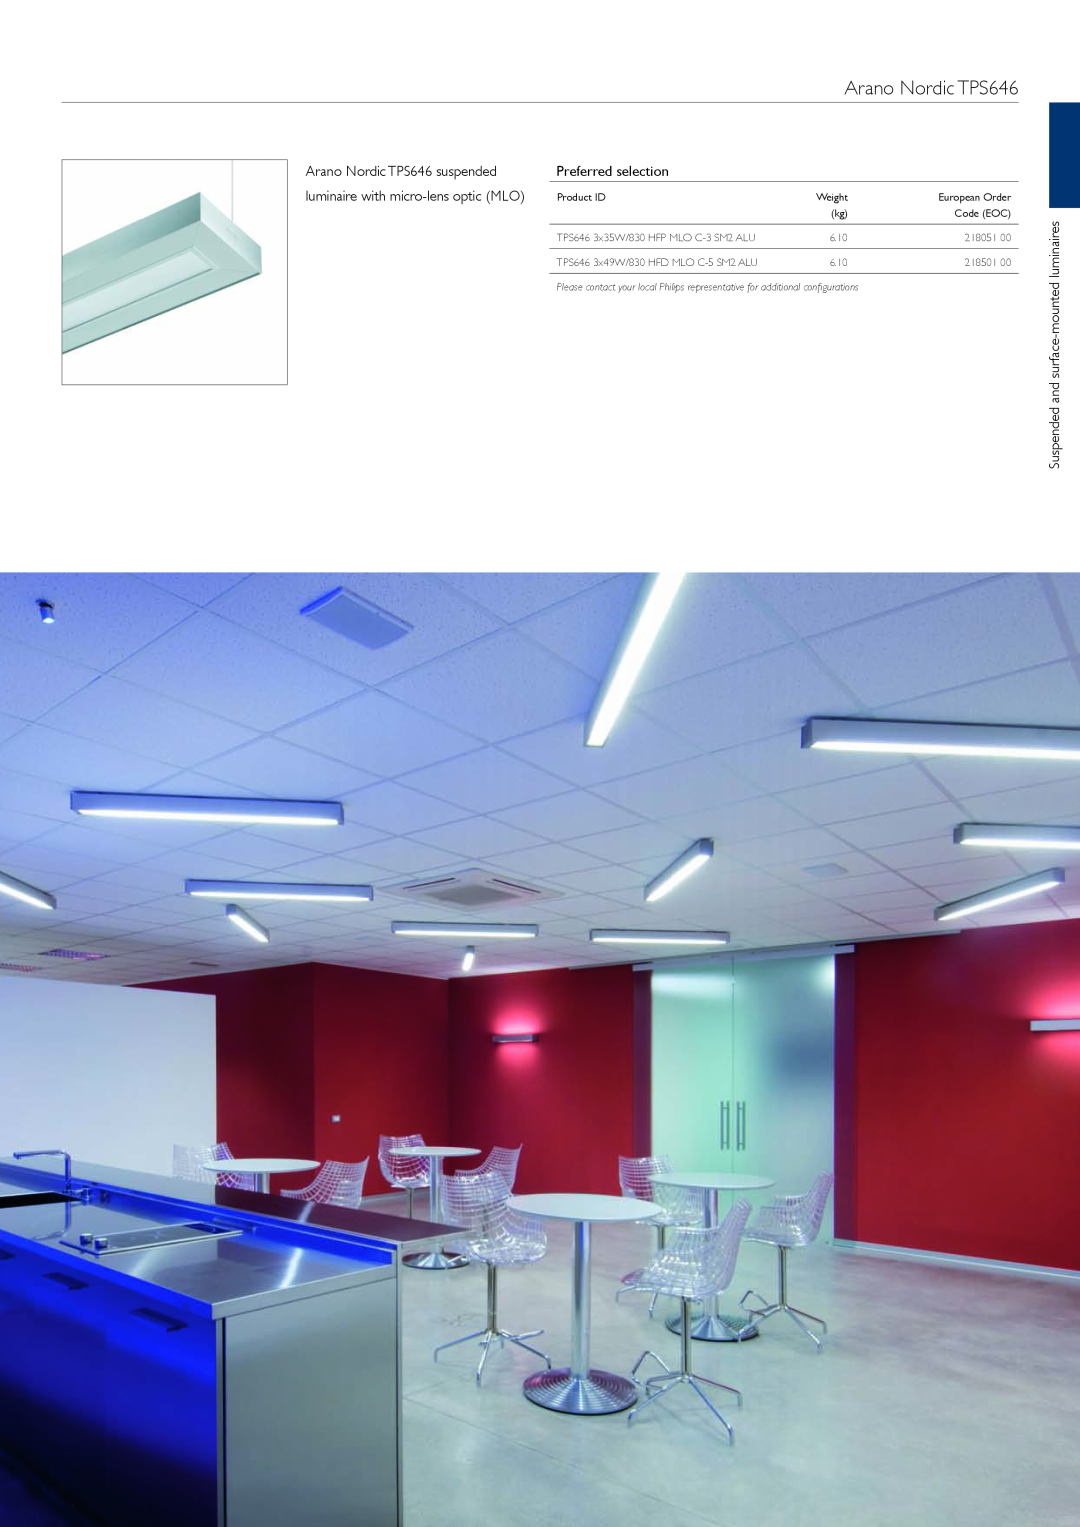 Philips TCS125 manual Arano Nordic TPS646 suspended, Preferred selection, luminaire with micro-lensoptic MLO, 3.57 